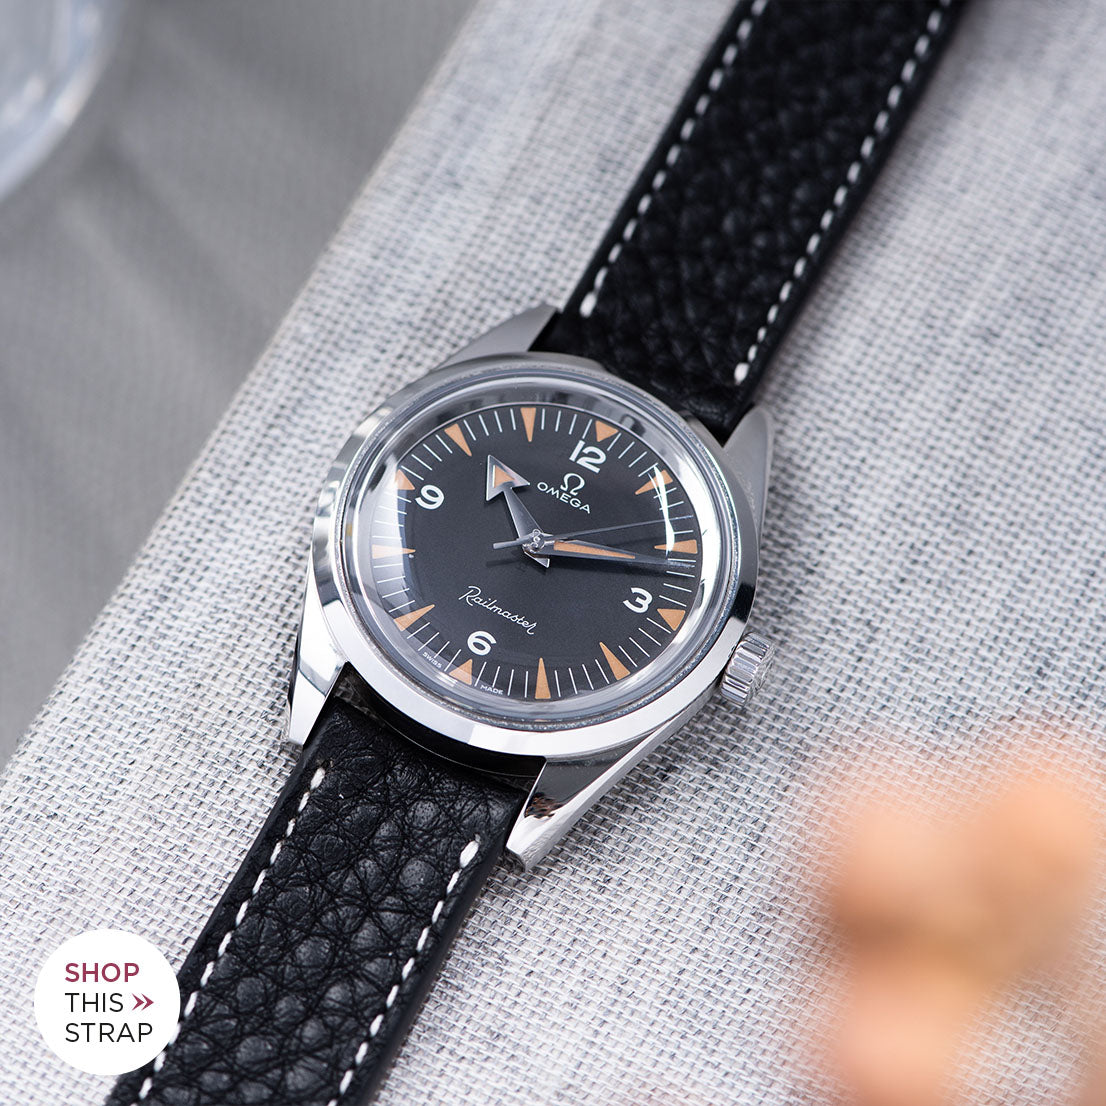 Bulang and Sons_Strap Guide_The Omega Railmaster_Rich Black Creme Stitch Leather Watch Strap